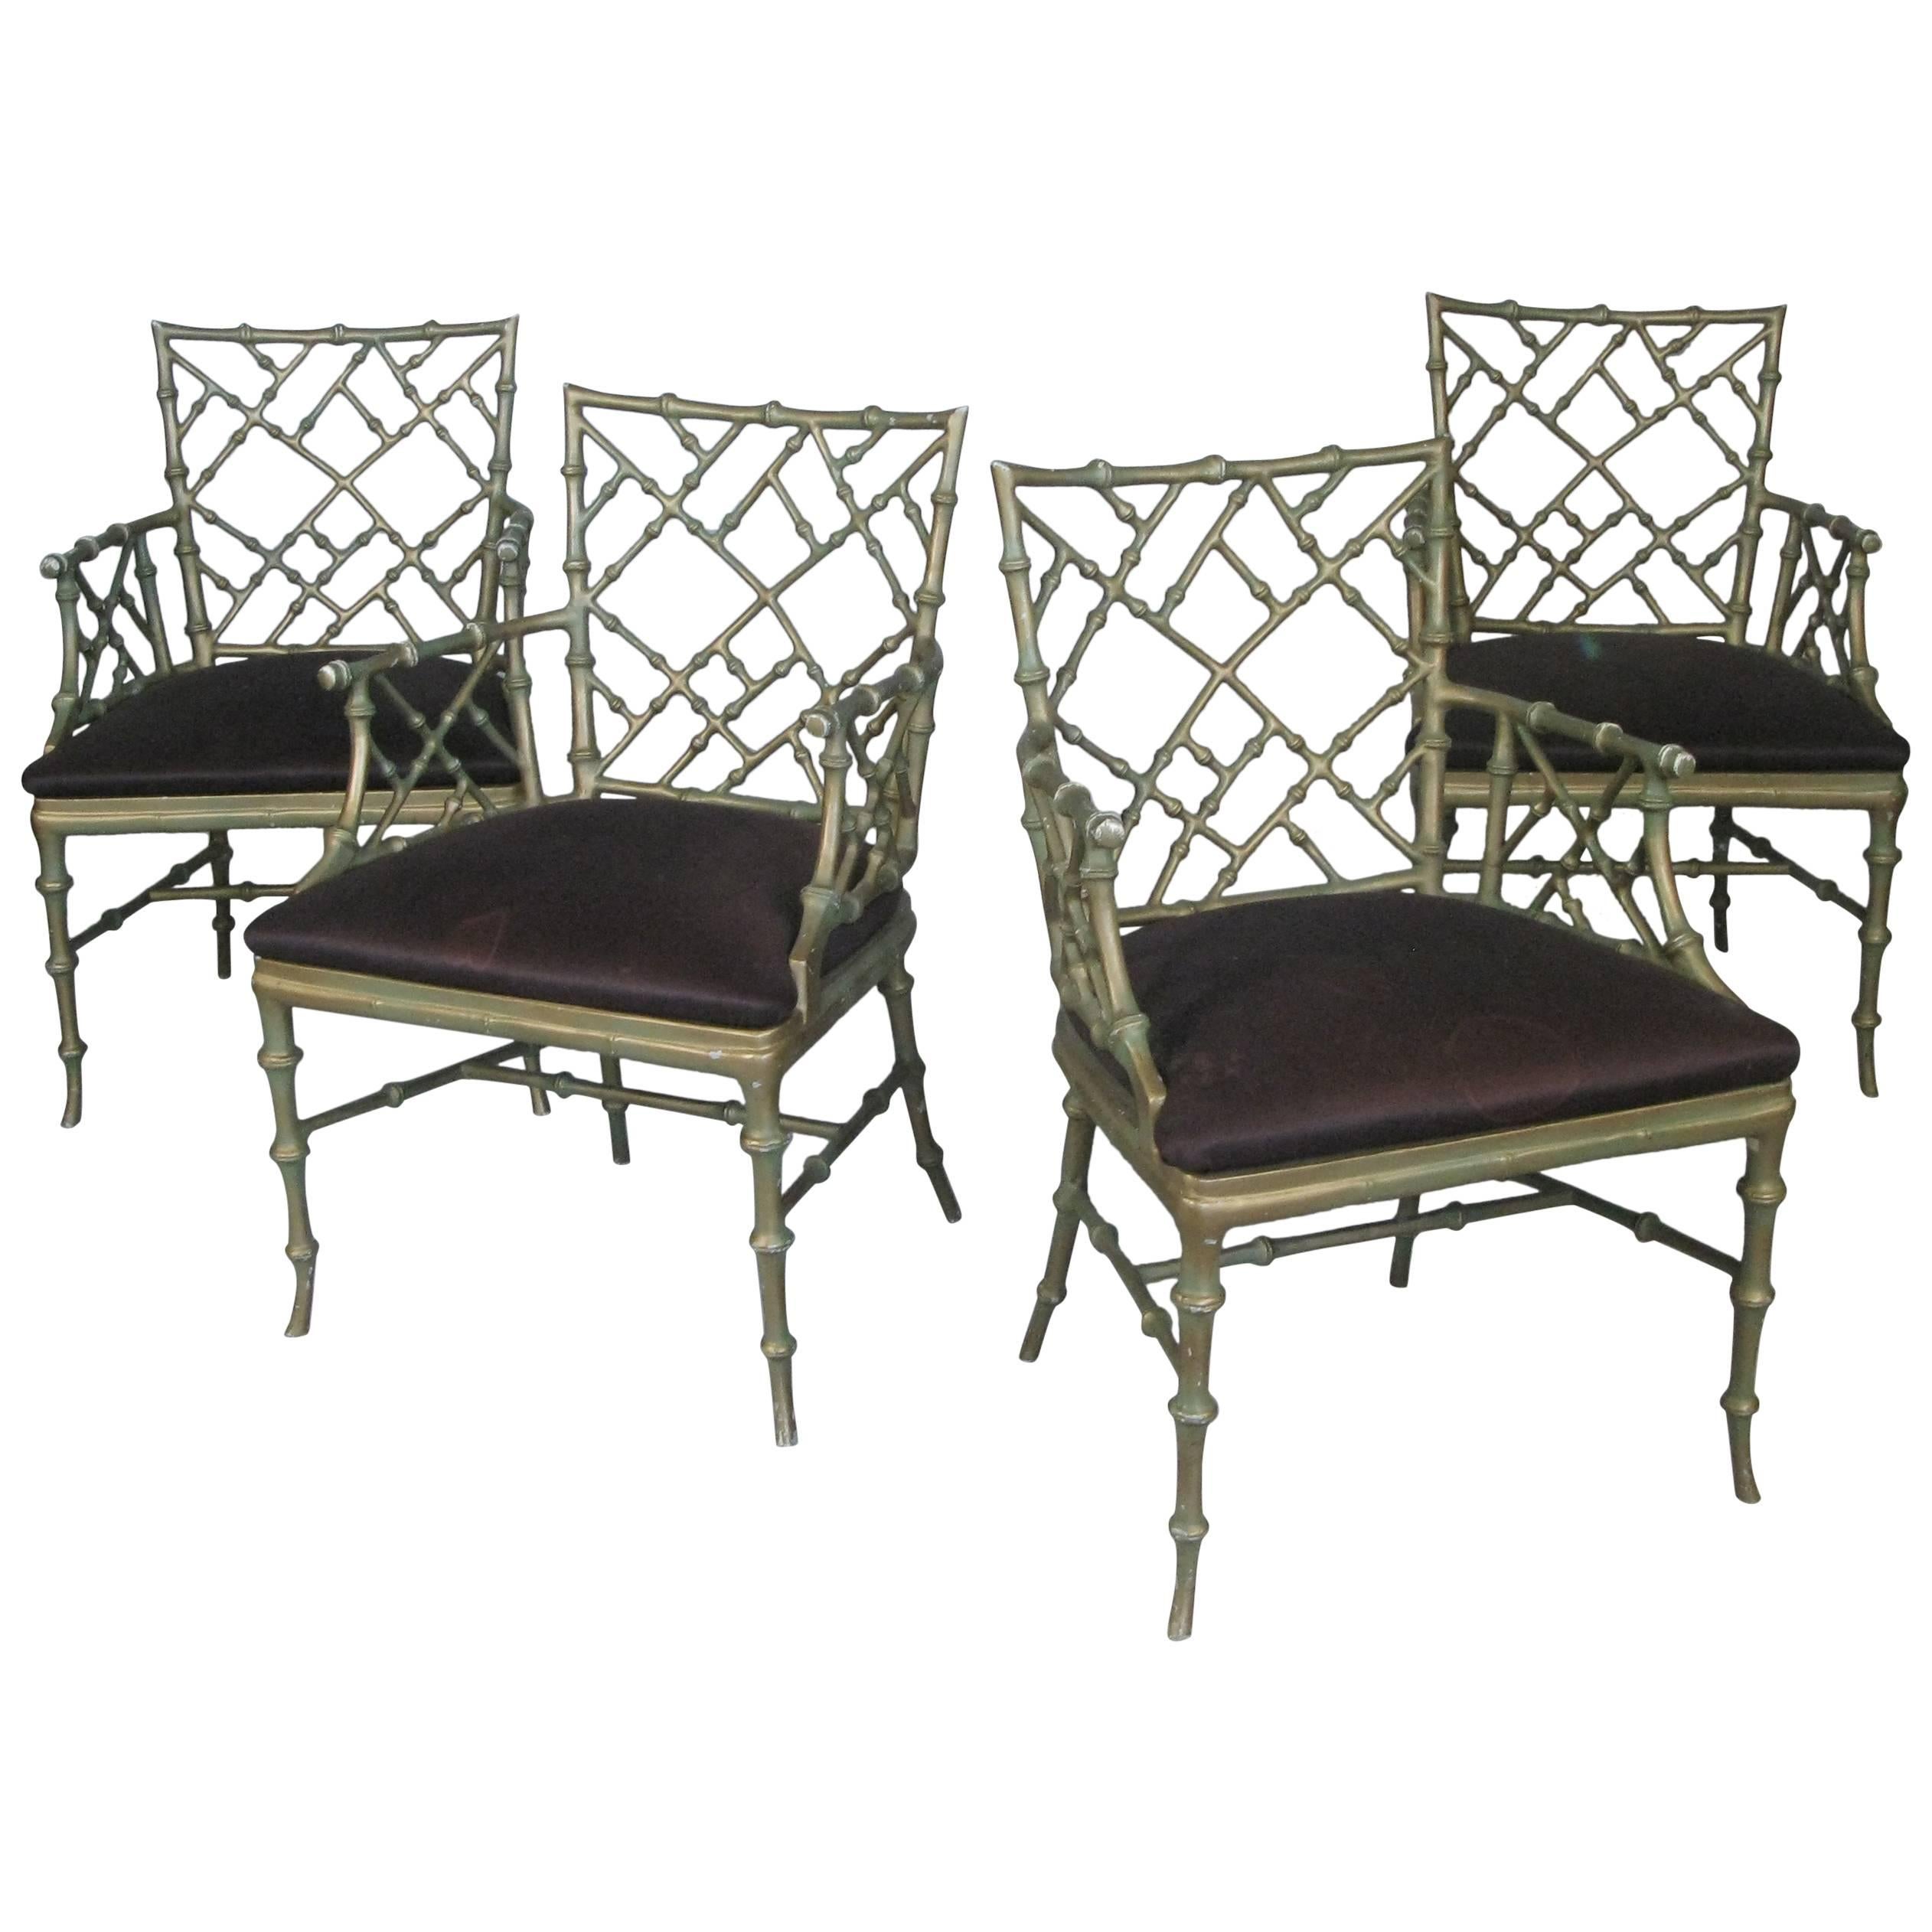 Set of Four Vintage Metal Bamboo Armchairs by Phyllis Morris